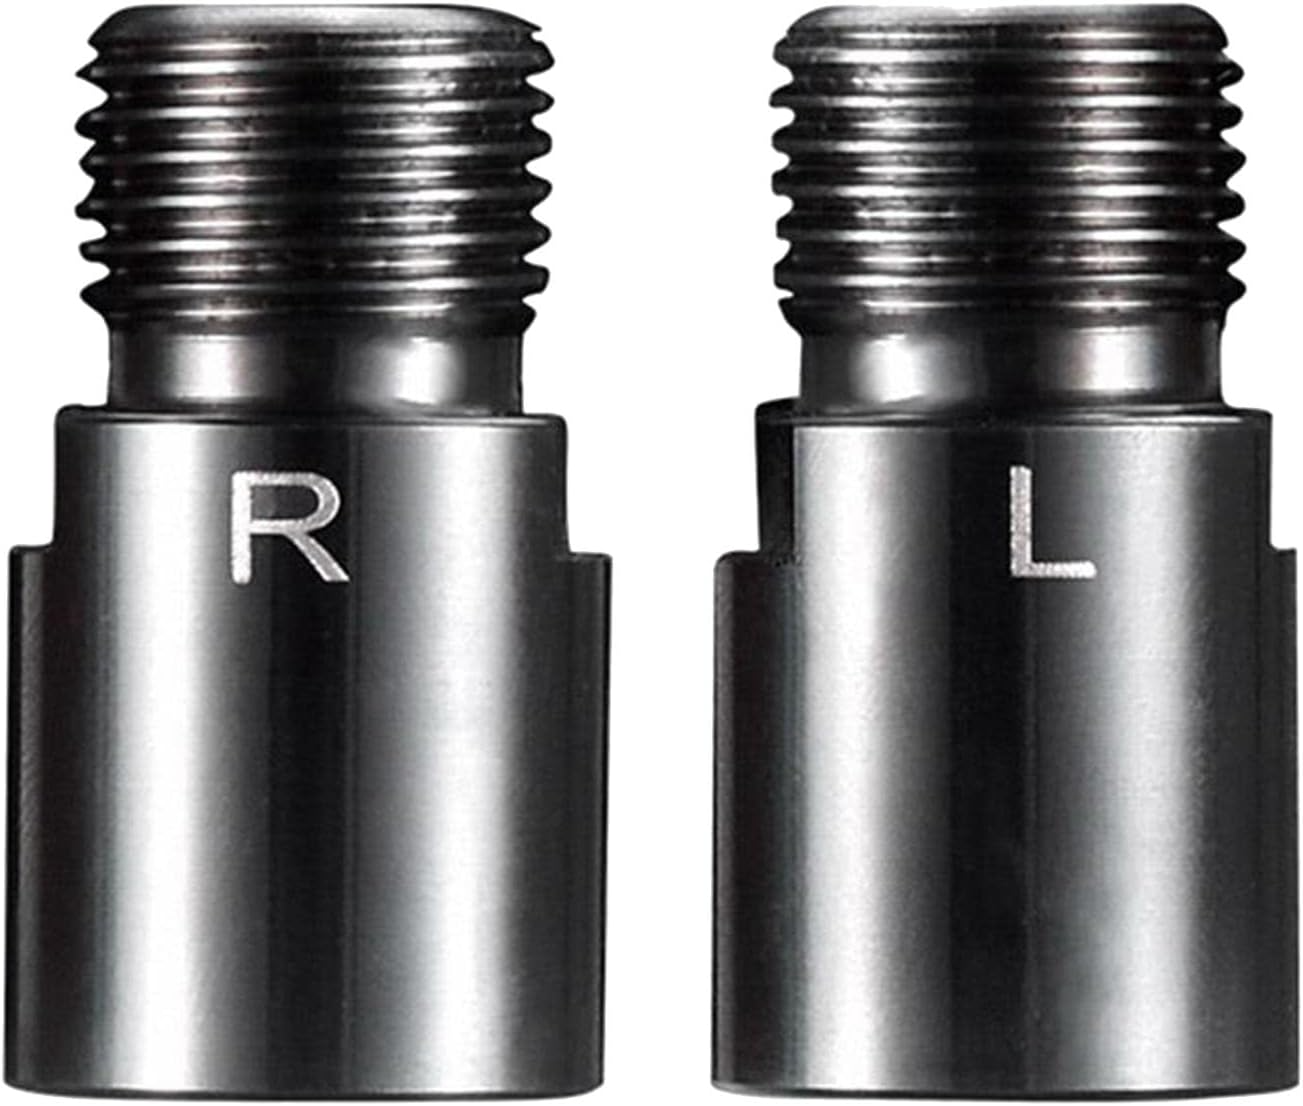 Two Tampa Bay eBikes pedal extenders - black for cycling shoes, labeled "r" for right and "l" for left, with threaded tops designed to enhance the cycling experience.